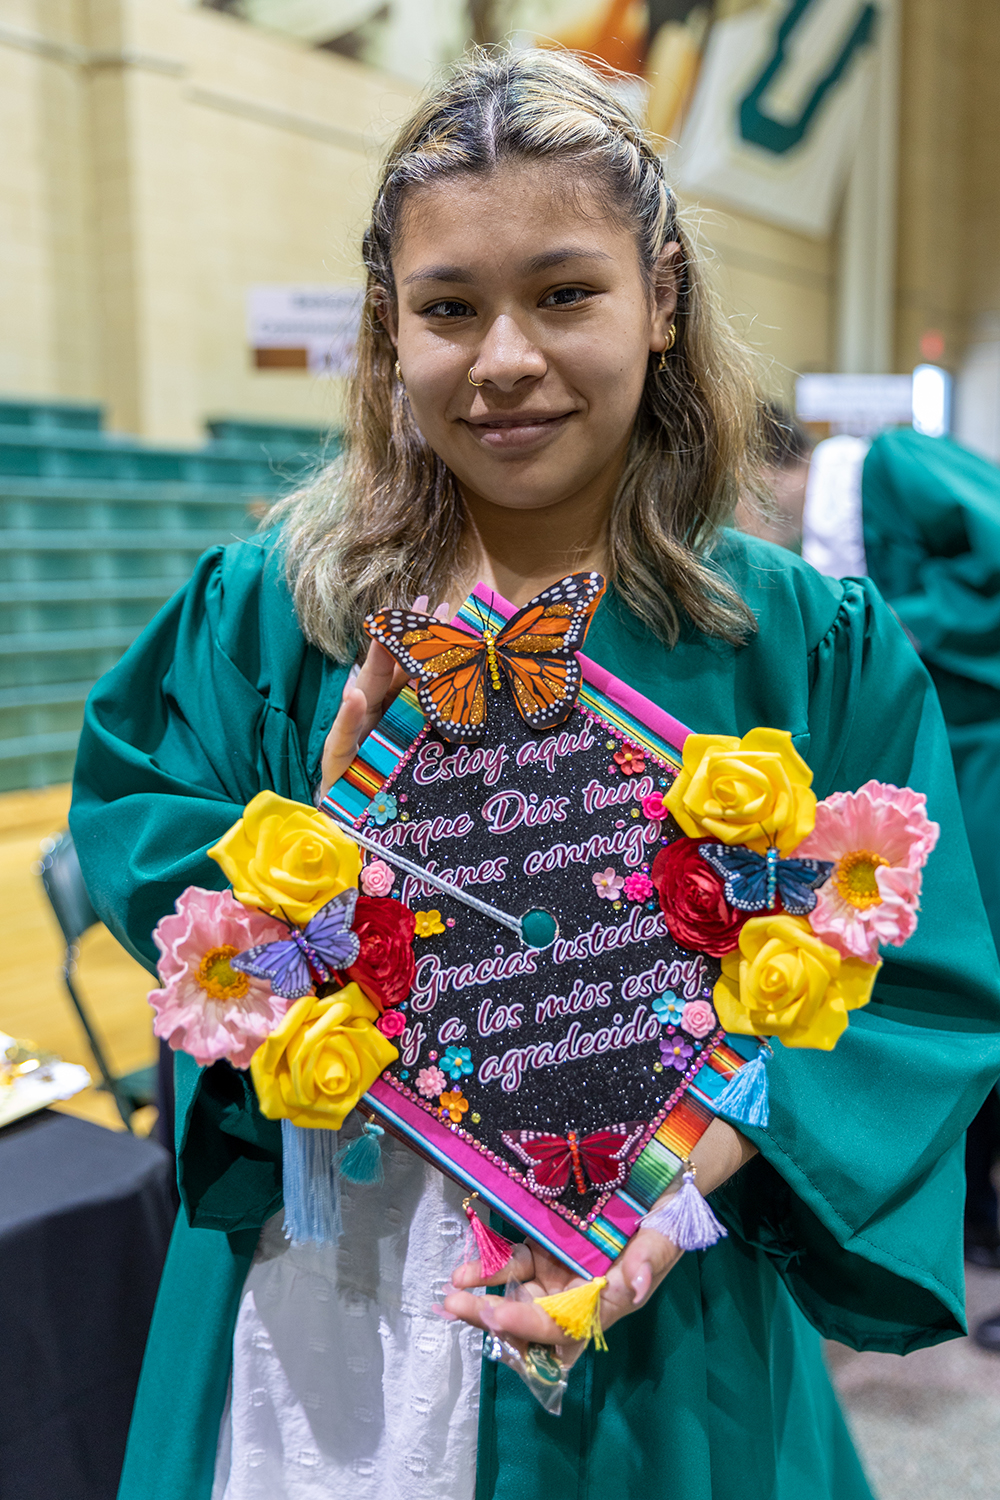 Graduation Cap with Thank You Message in Spanish